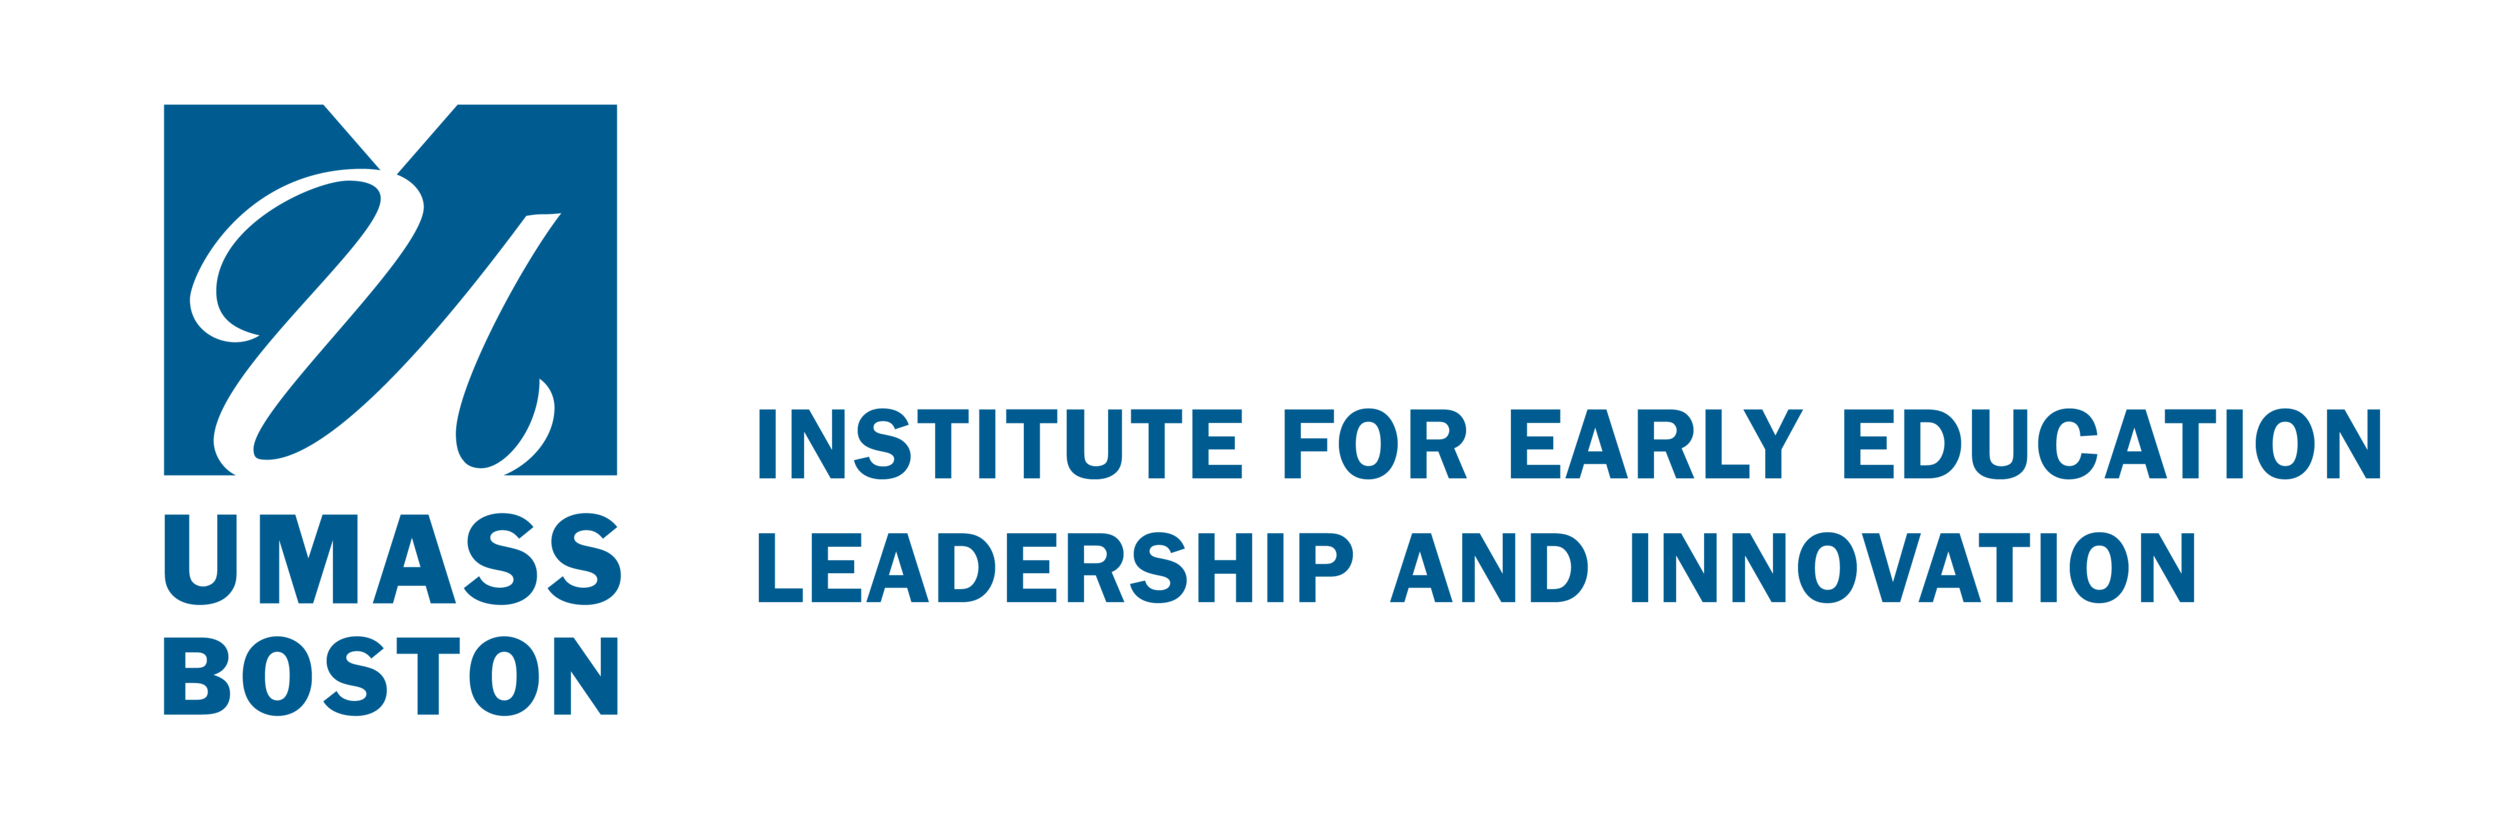 Institute for Early Education Leadership and Innovation.png